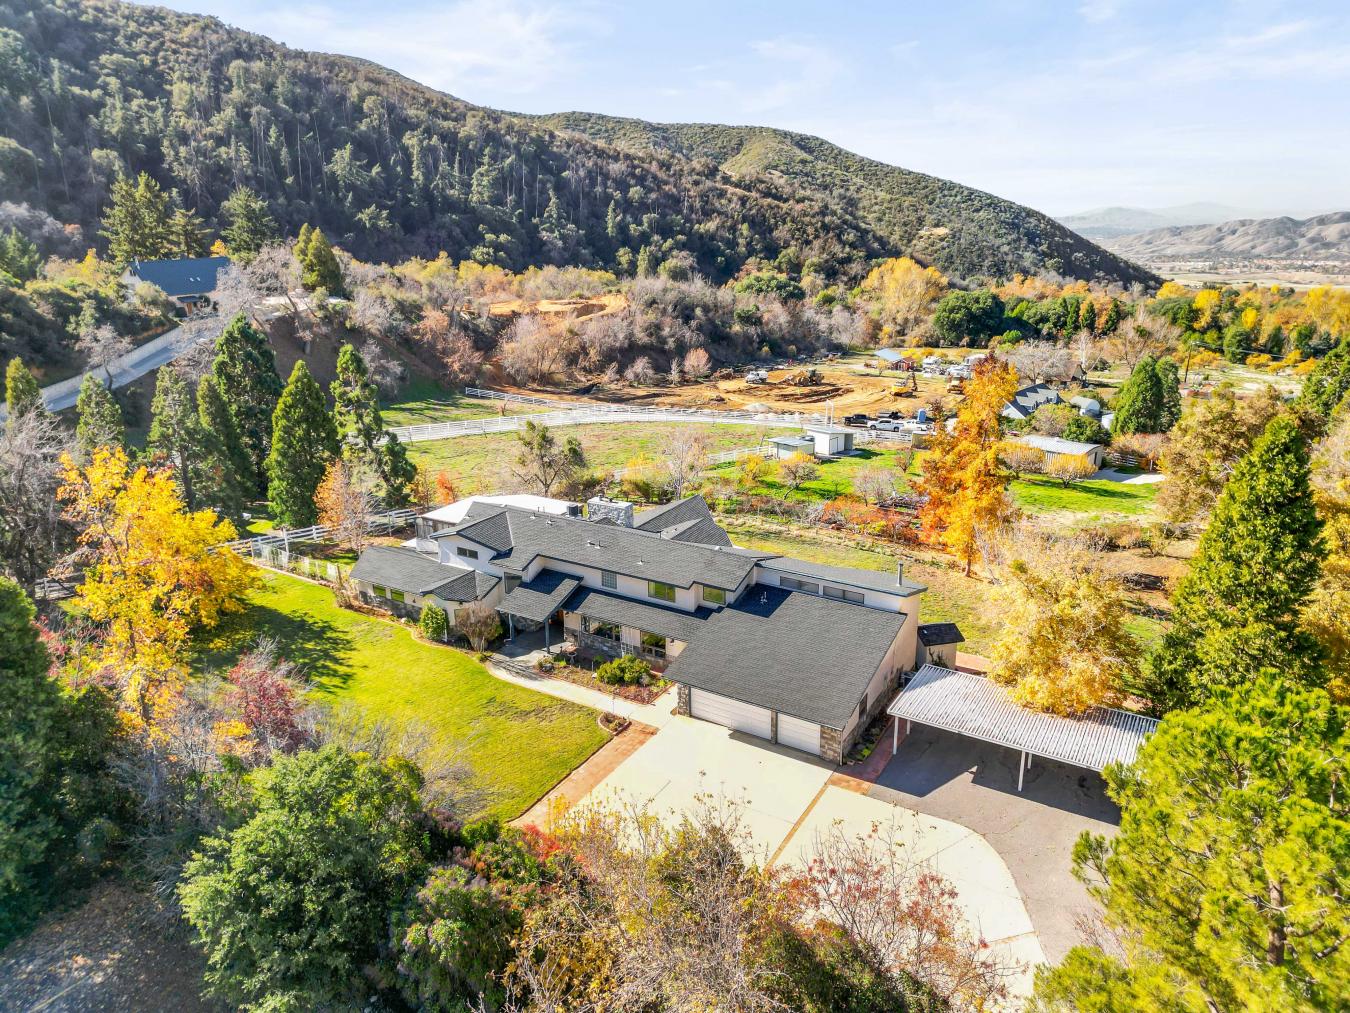 38387 Potato Canyon Road, Yucaipa, California, 92399, United States, 5 Bedrooms Bedrooms, ,5 BathroomsBathrooms,Residential,For Sale,38387 Potato Canyon Road,1448202